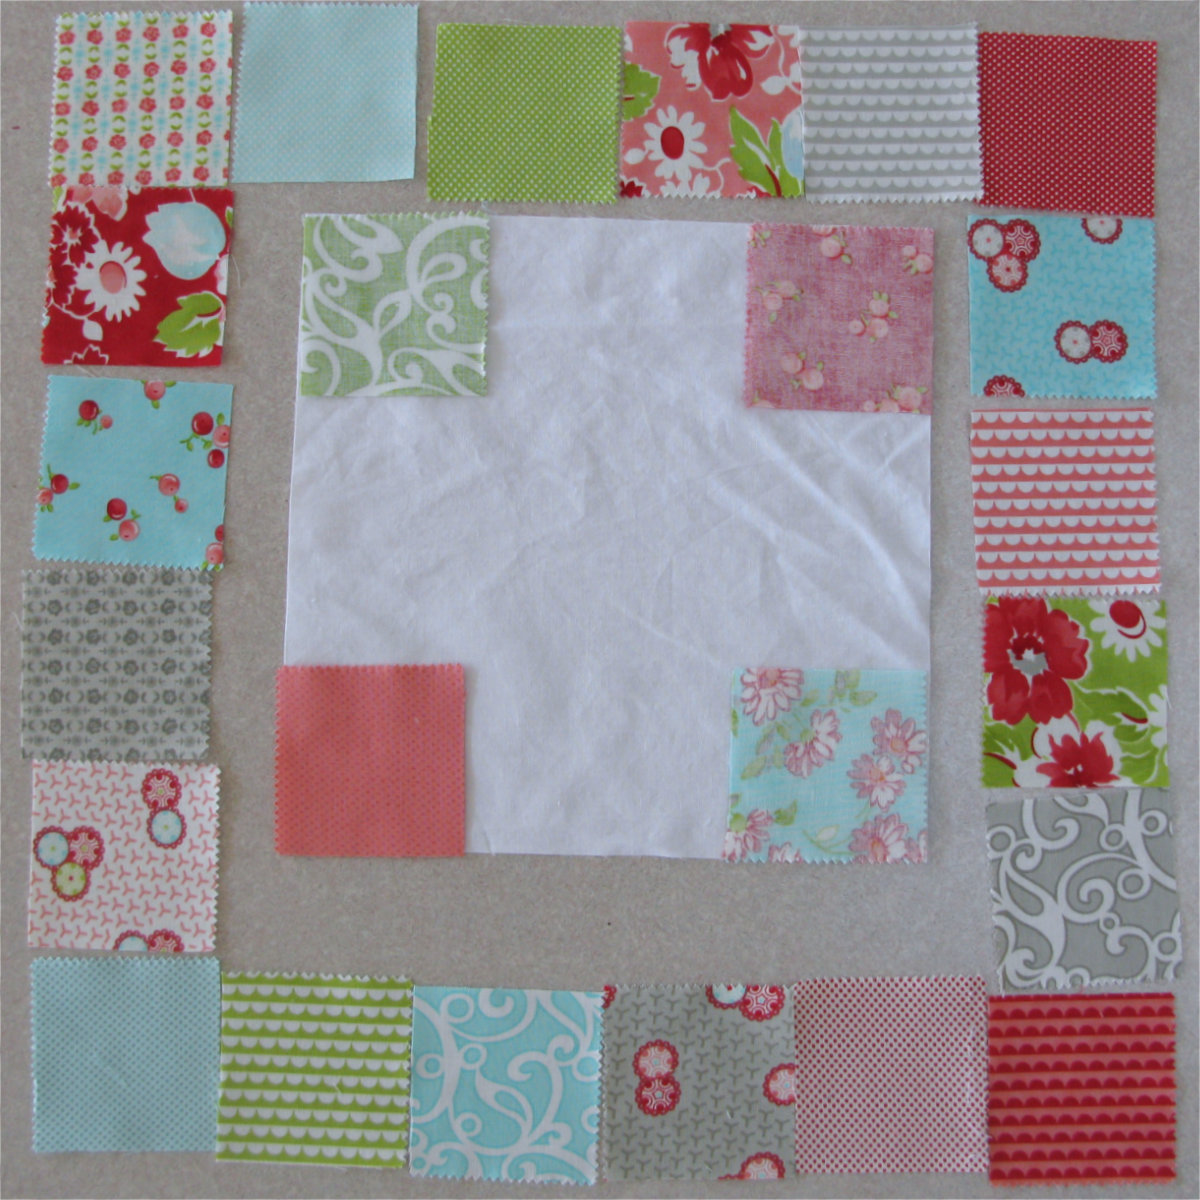 Cut the charm squares into 2 1/2 inch squares